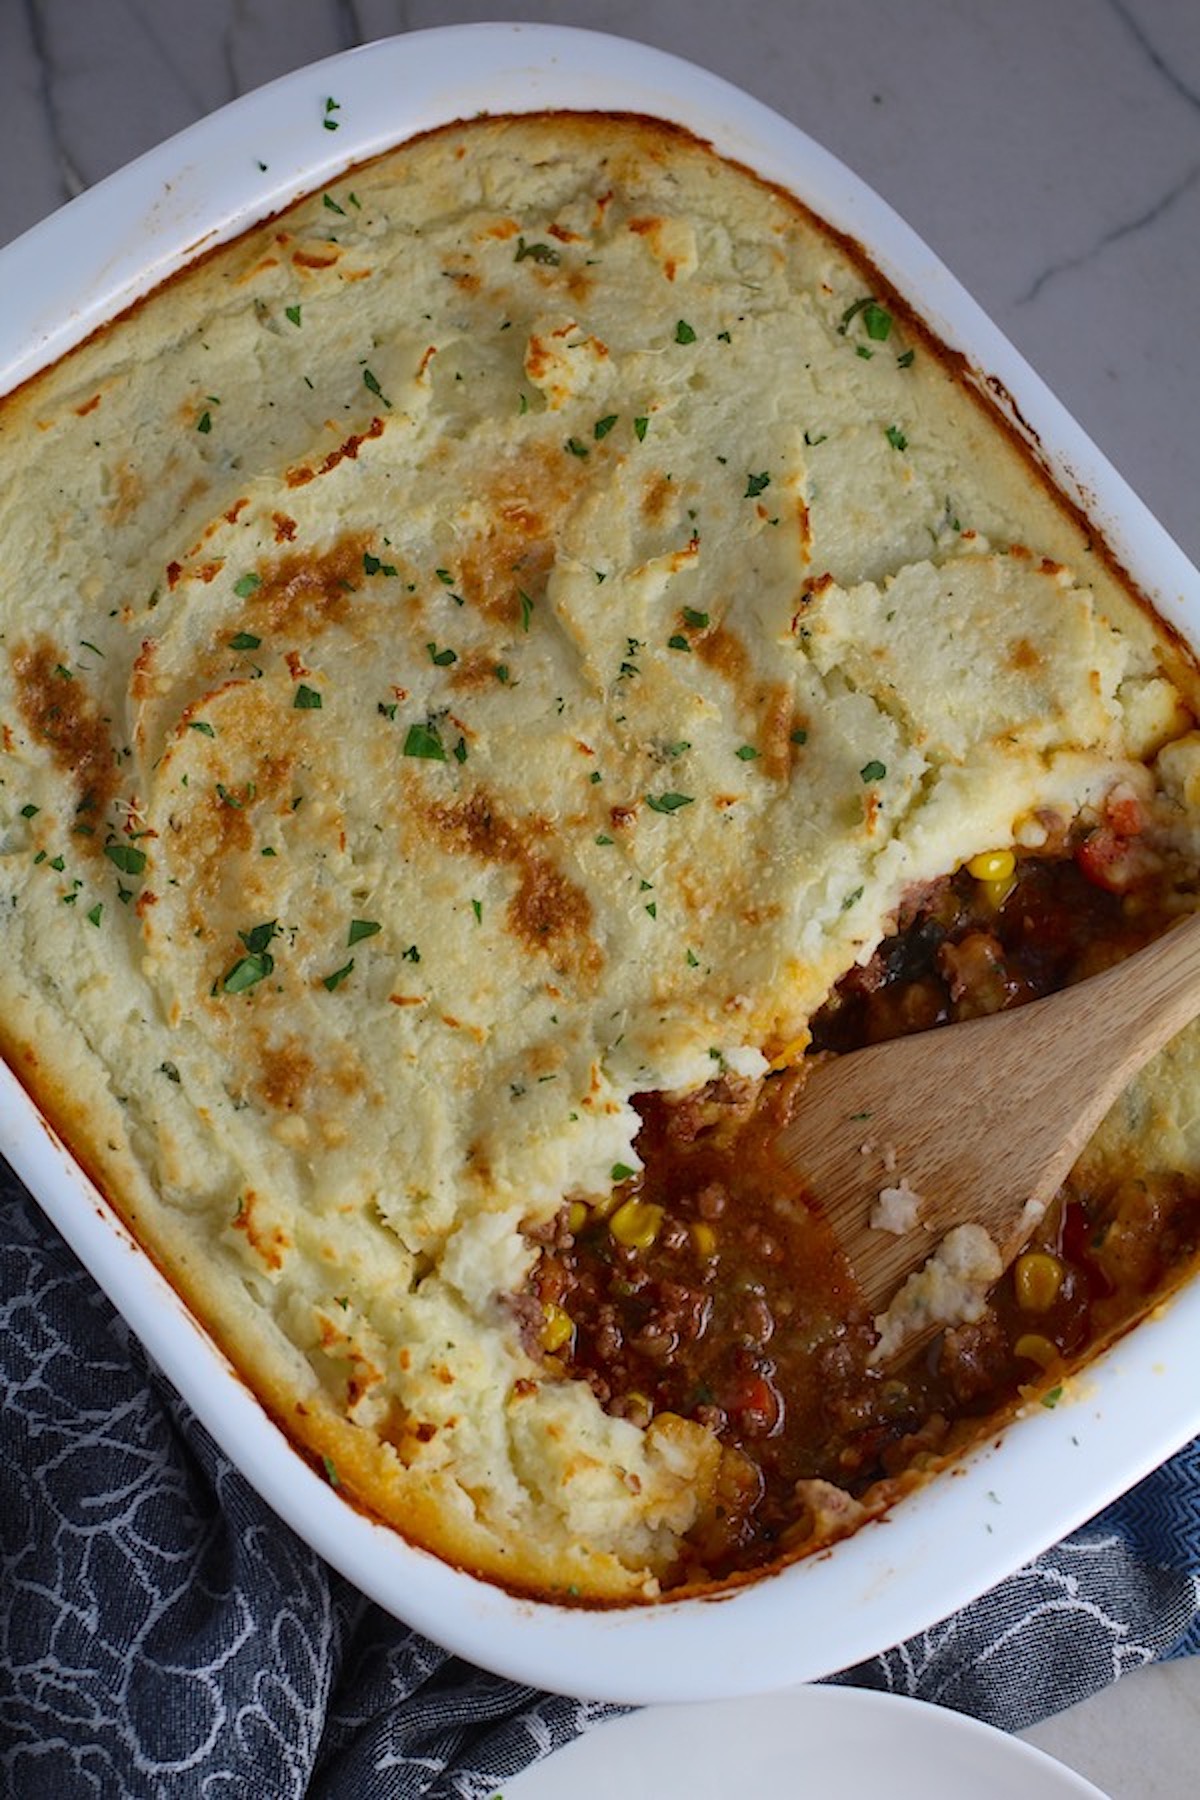 Spatula in Sausage Shepherds Pie in casserole dish. This recipe has Spanish Chorizo and ground beef cooked in a rich and savory gravy with veggies and herbs.  Creamy mashed potatoes sit on top with manchego, parmesan, and garlic.